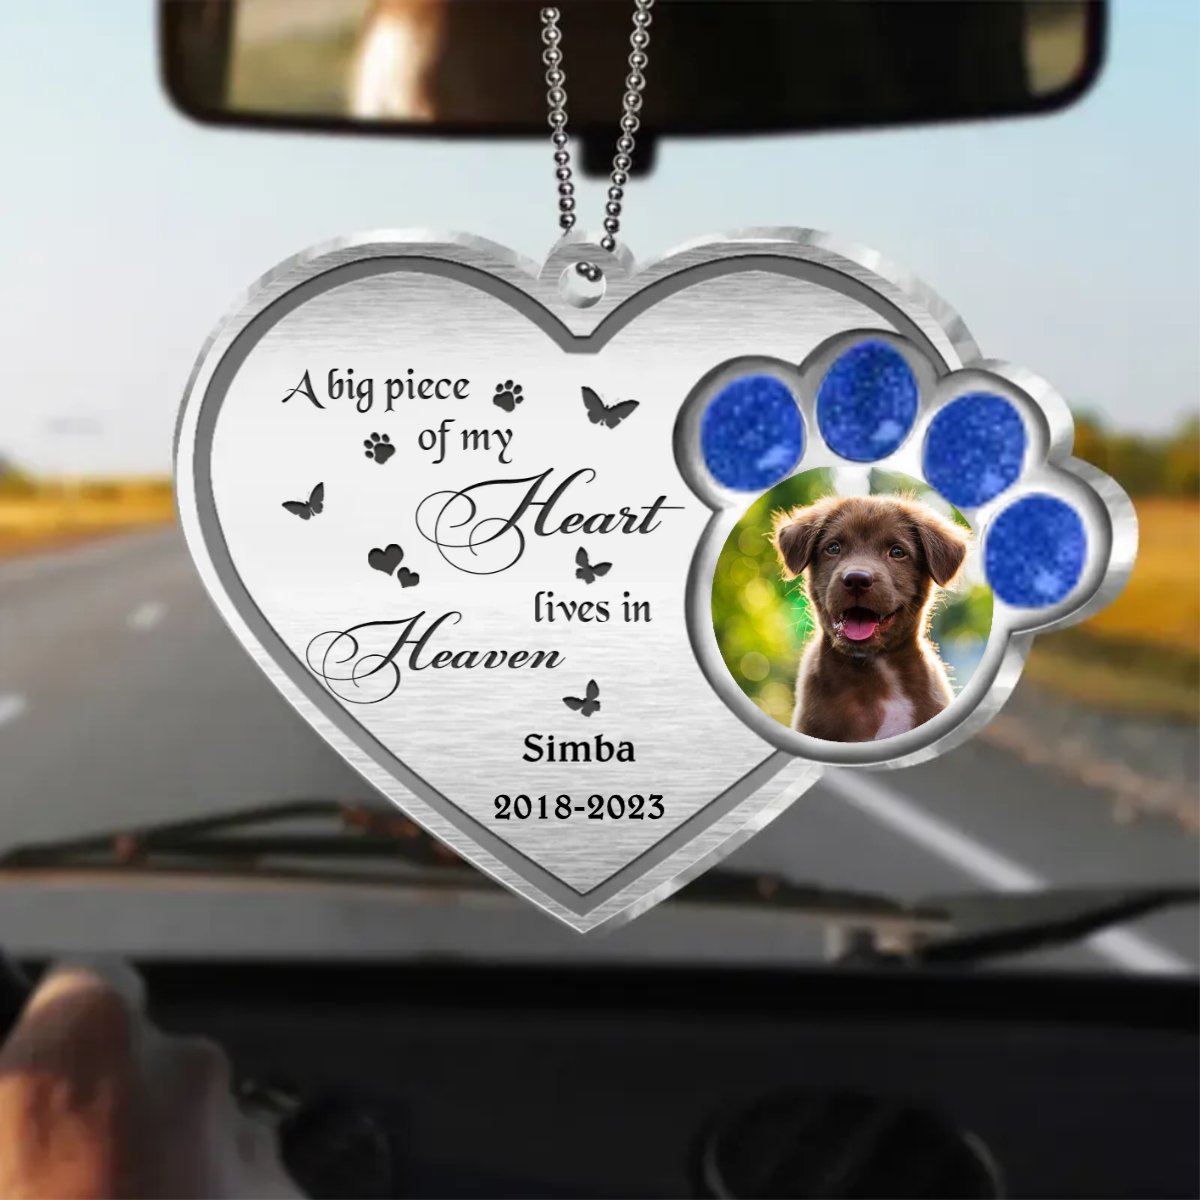 A Big Piece Of My Heart Lives In Heaven - Personalized Car Photo Ornament - The Next Custom Gift